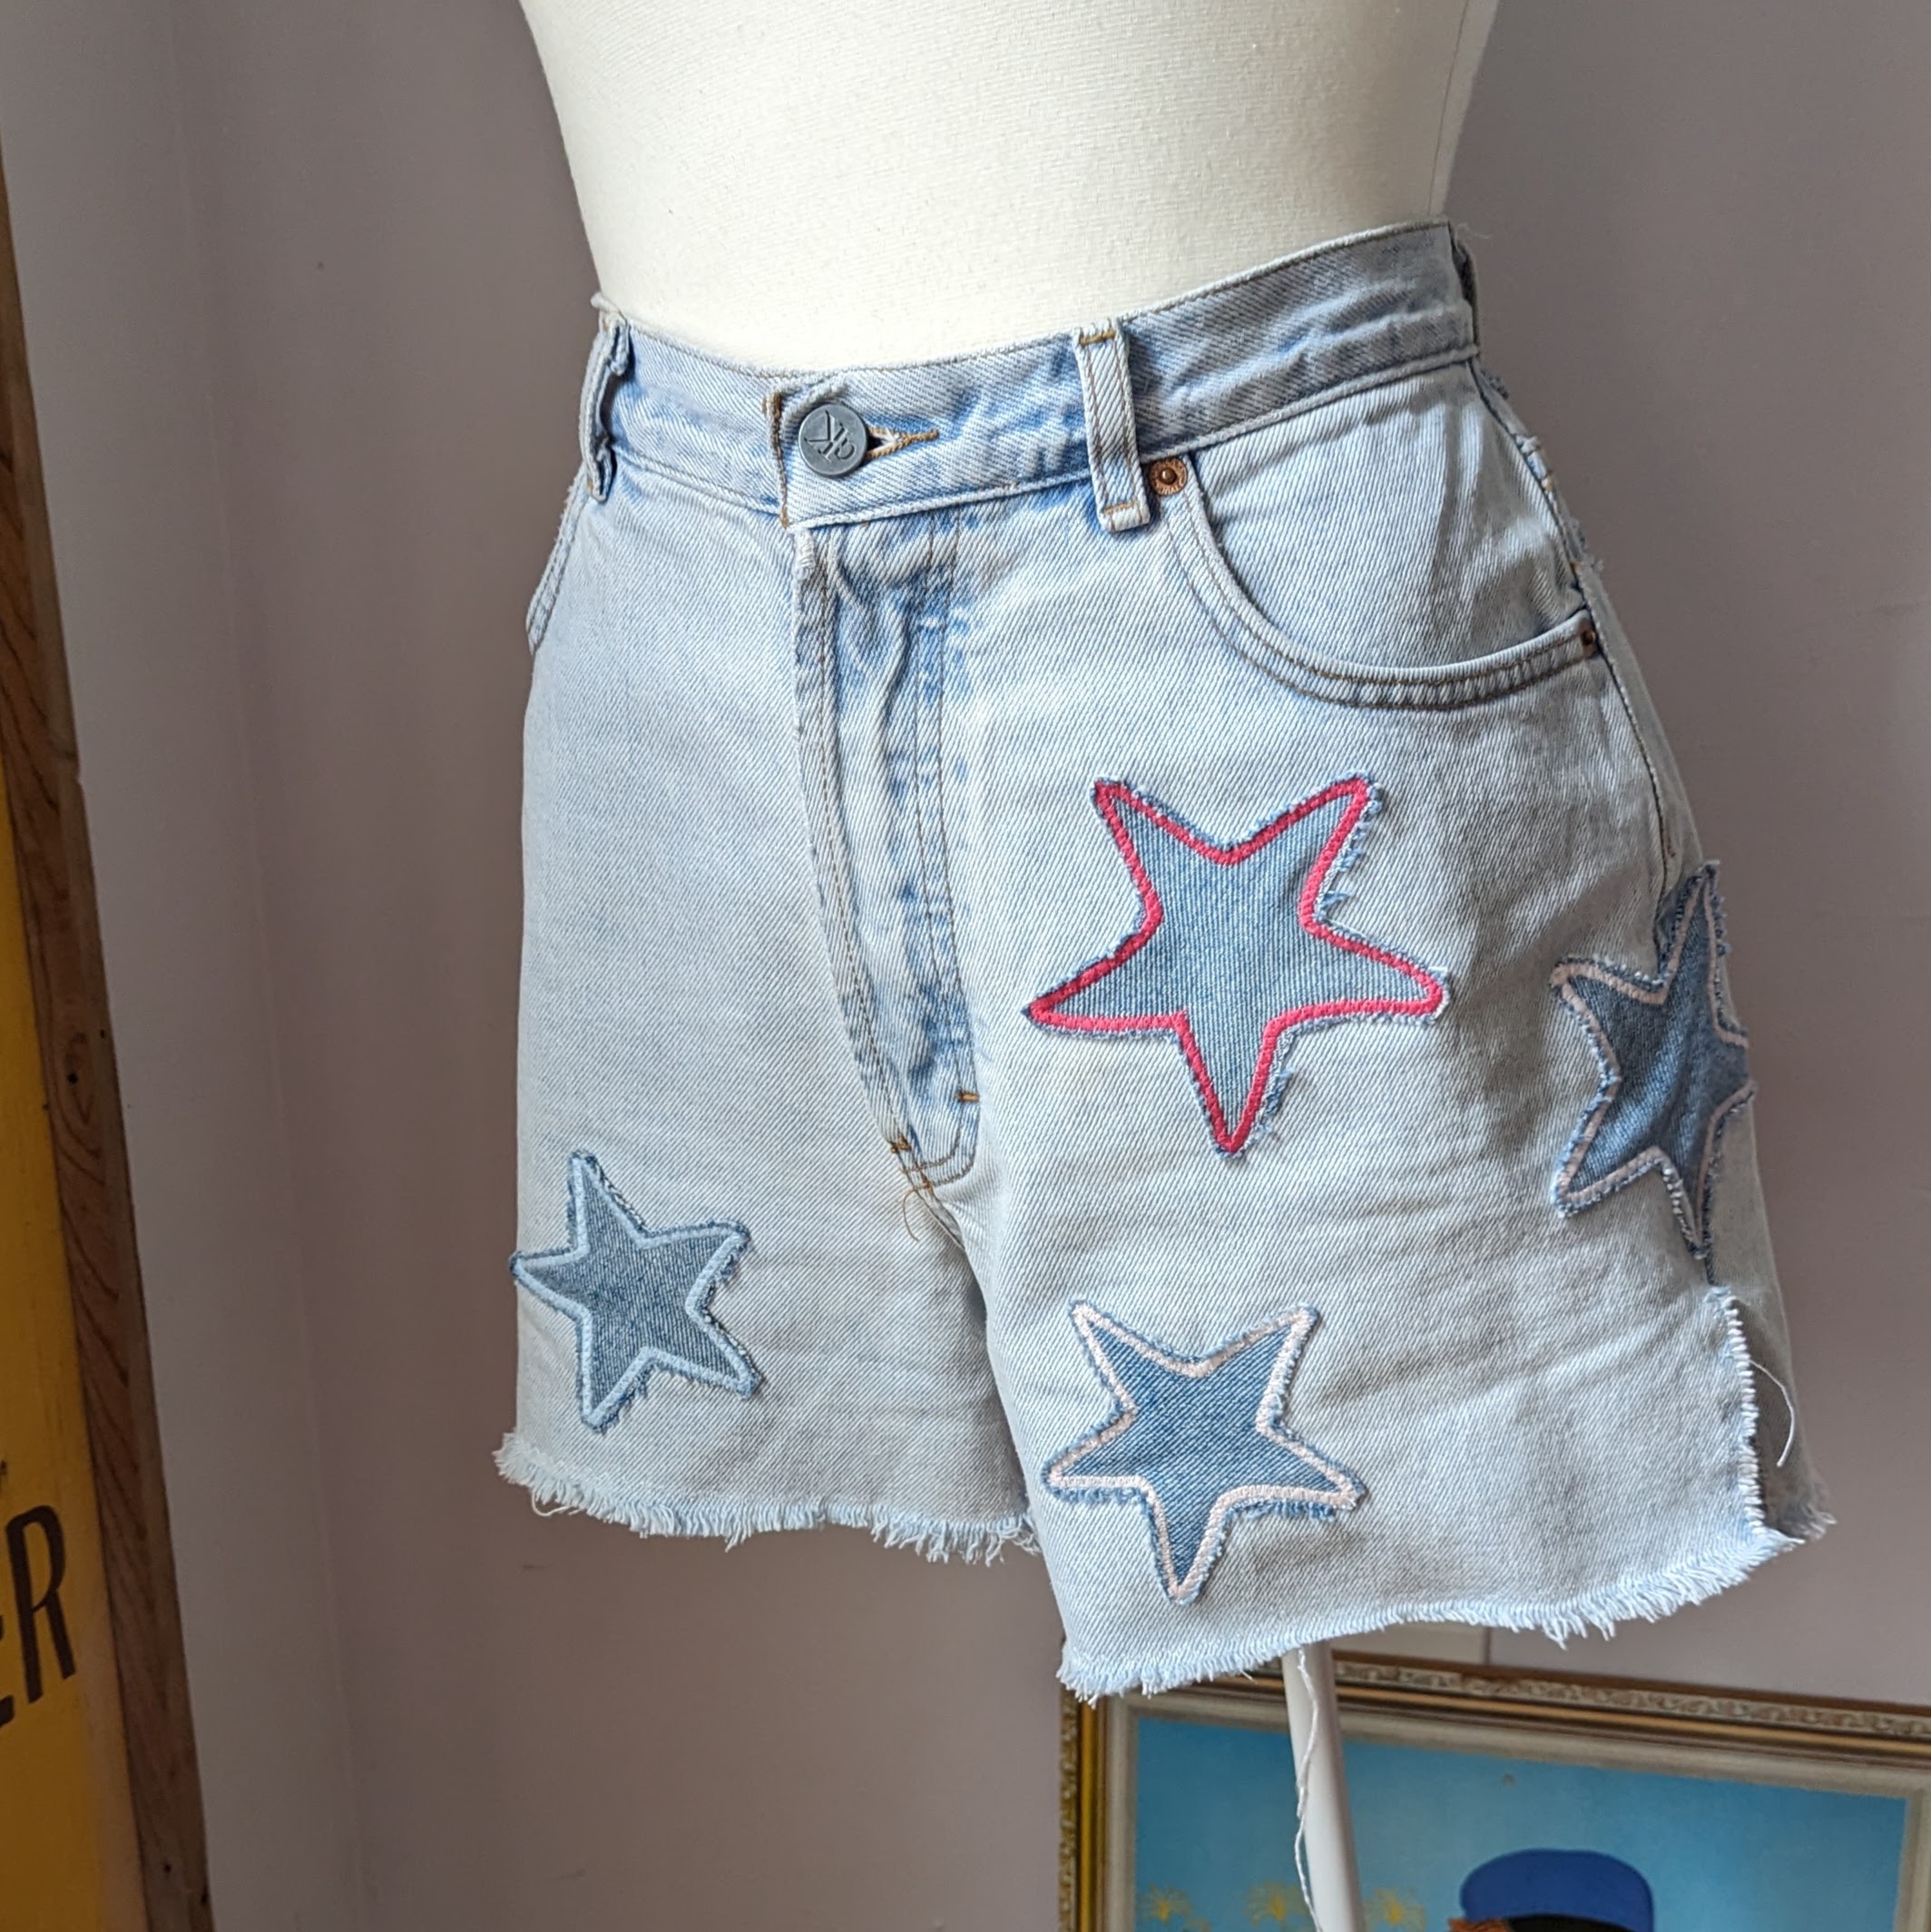 a white mannequin wearing a pair of shorts with stars on them.